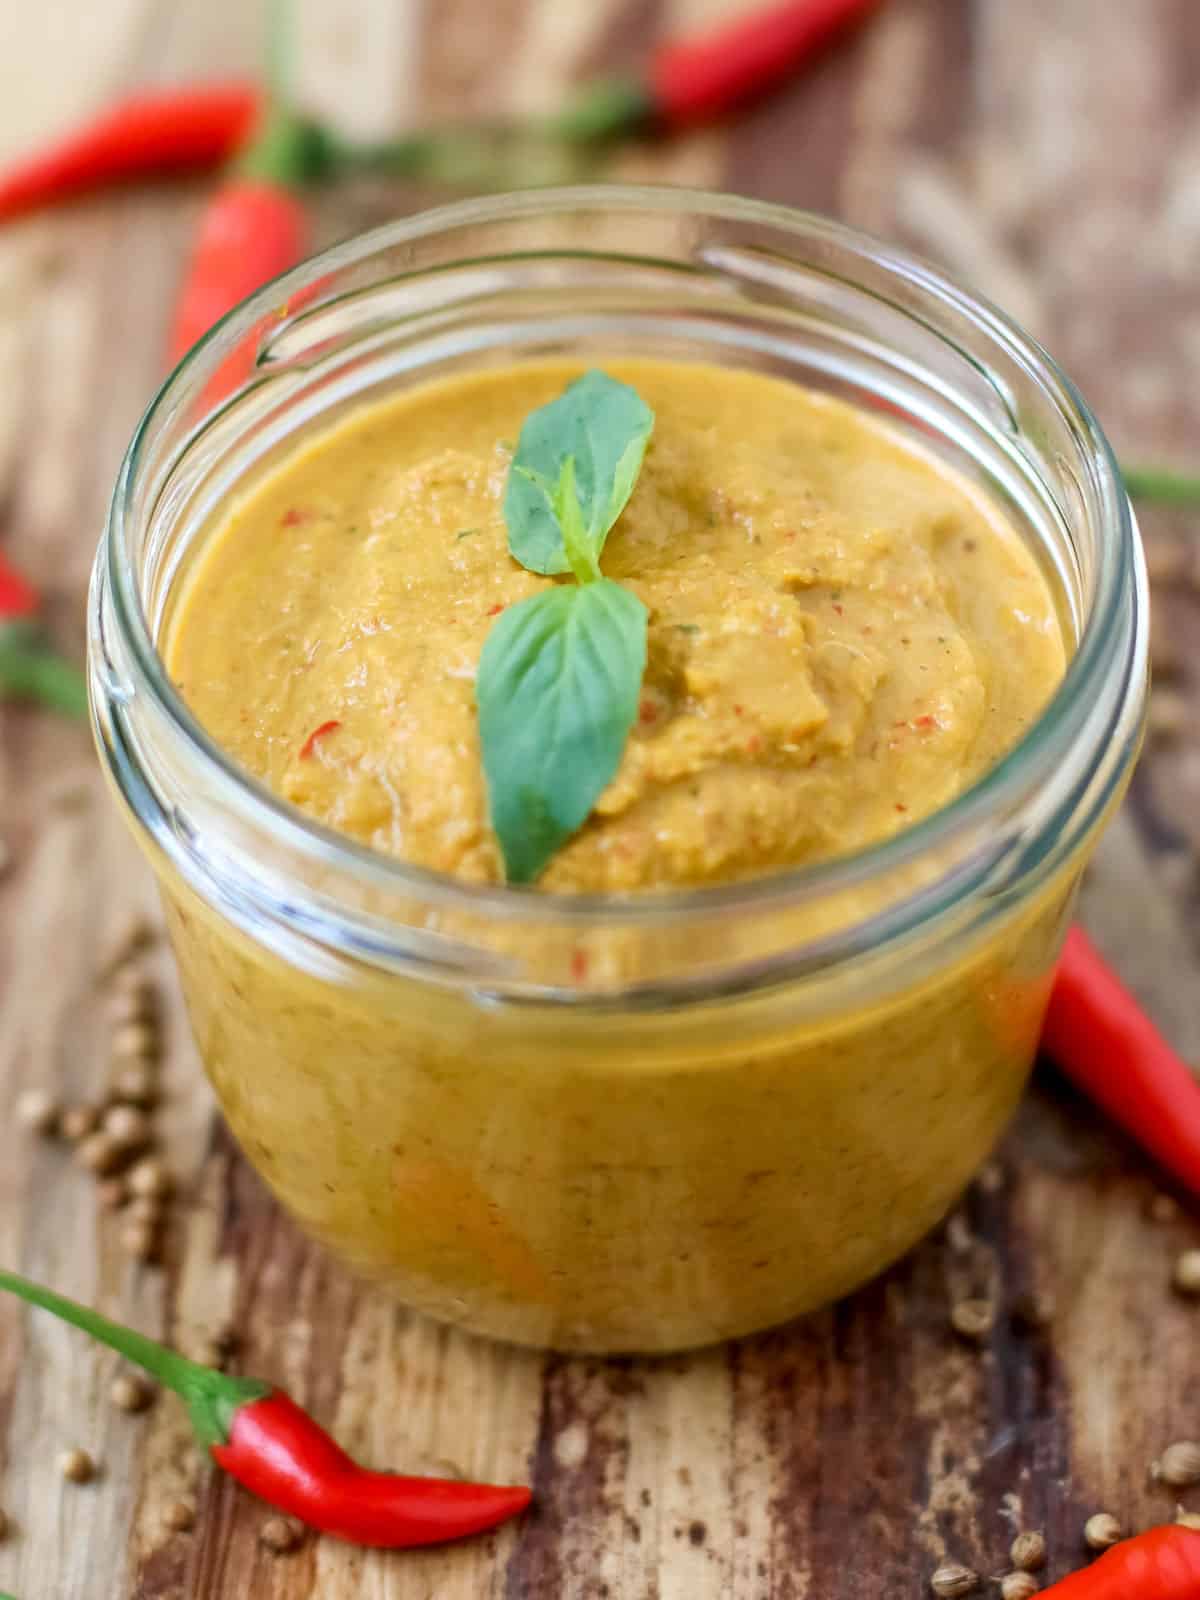 LowCarb Red Thai Curry Paste